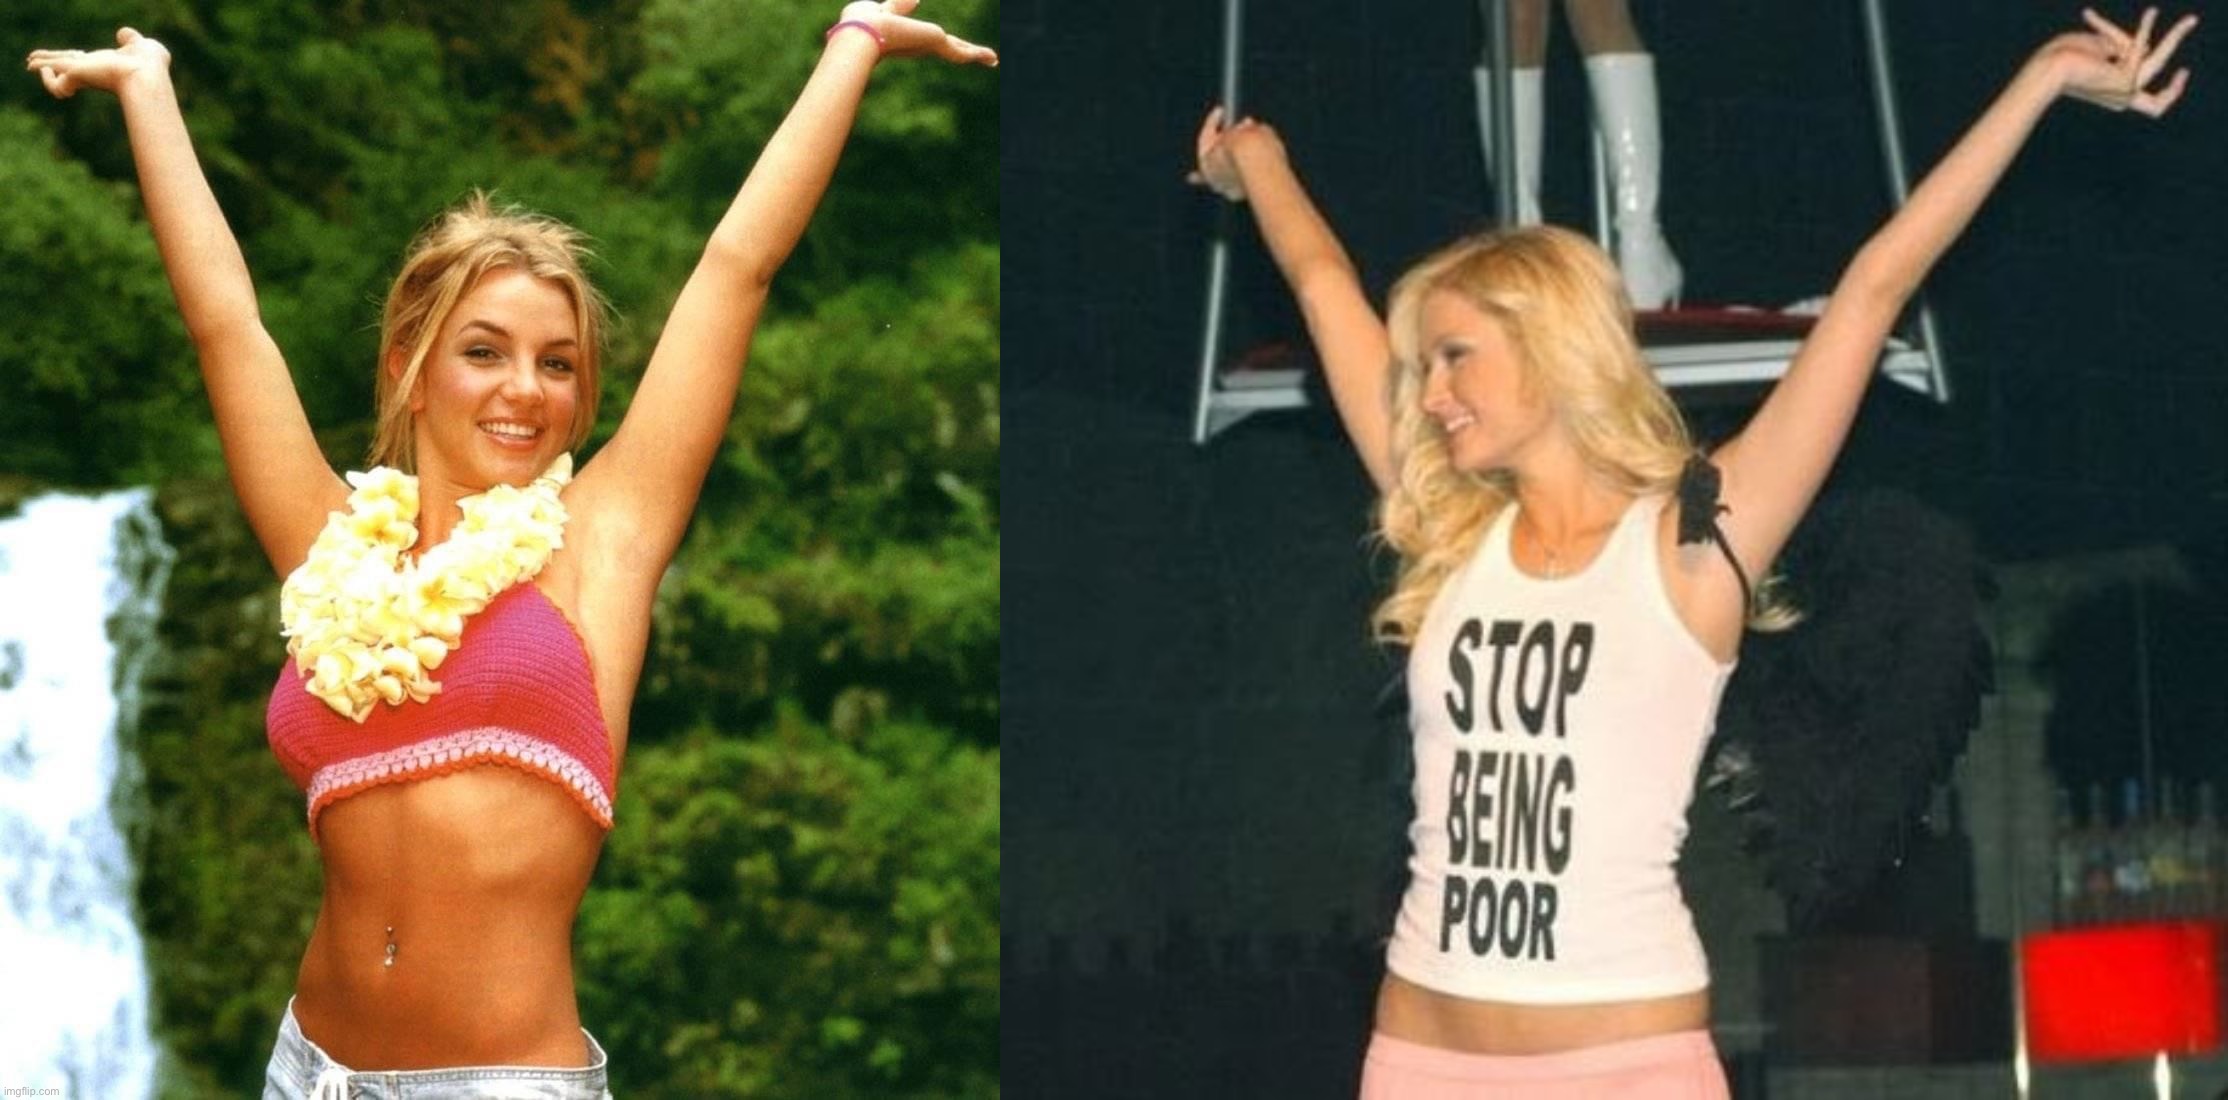 Who did it better? | image tagged in britney spears arms raised,stop being poor,britney spears,britney,leave britney alone,funny memes | made w/ Imgflip meme maker